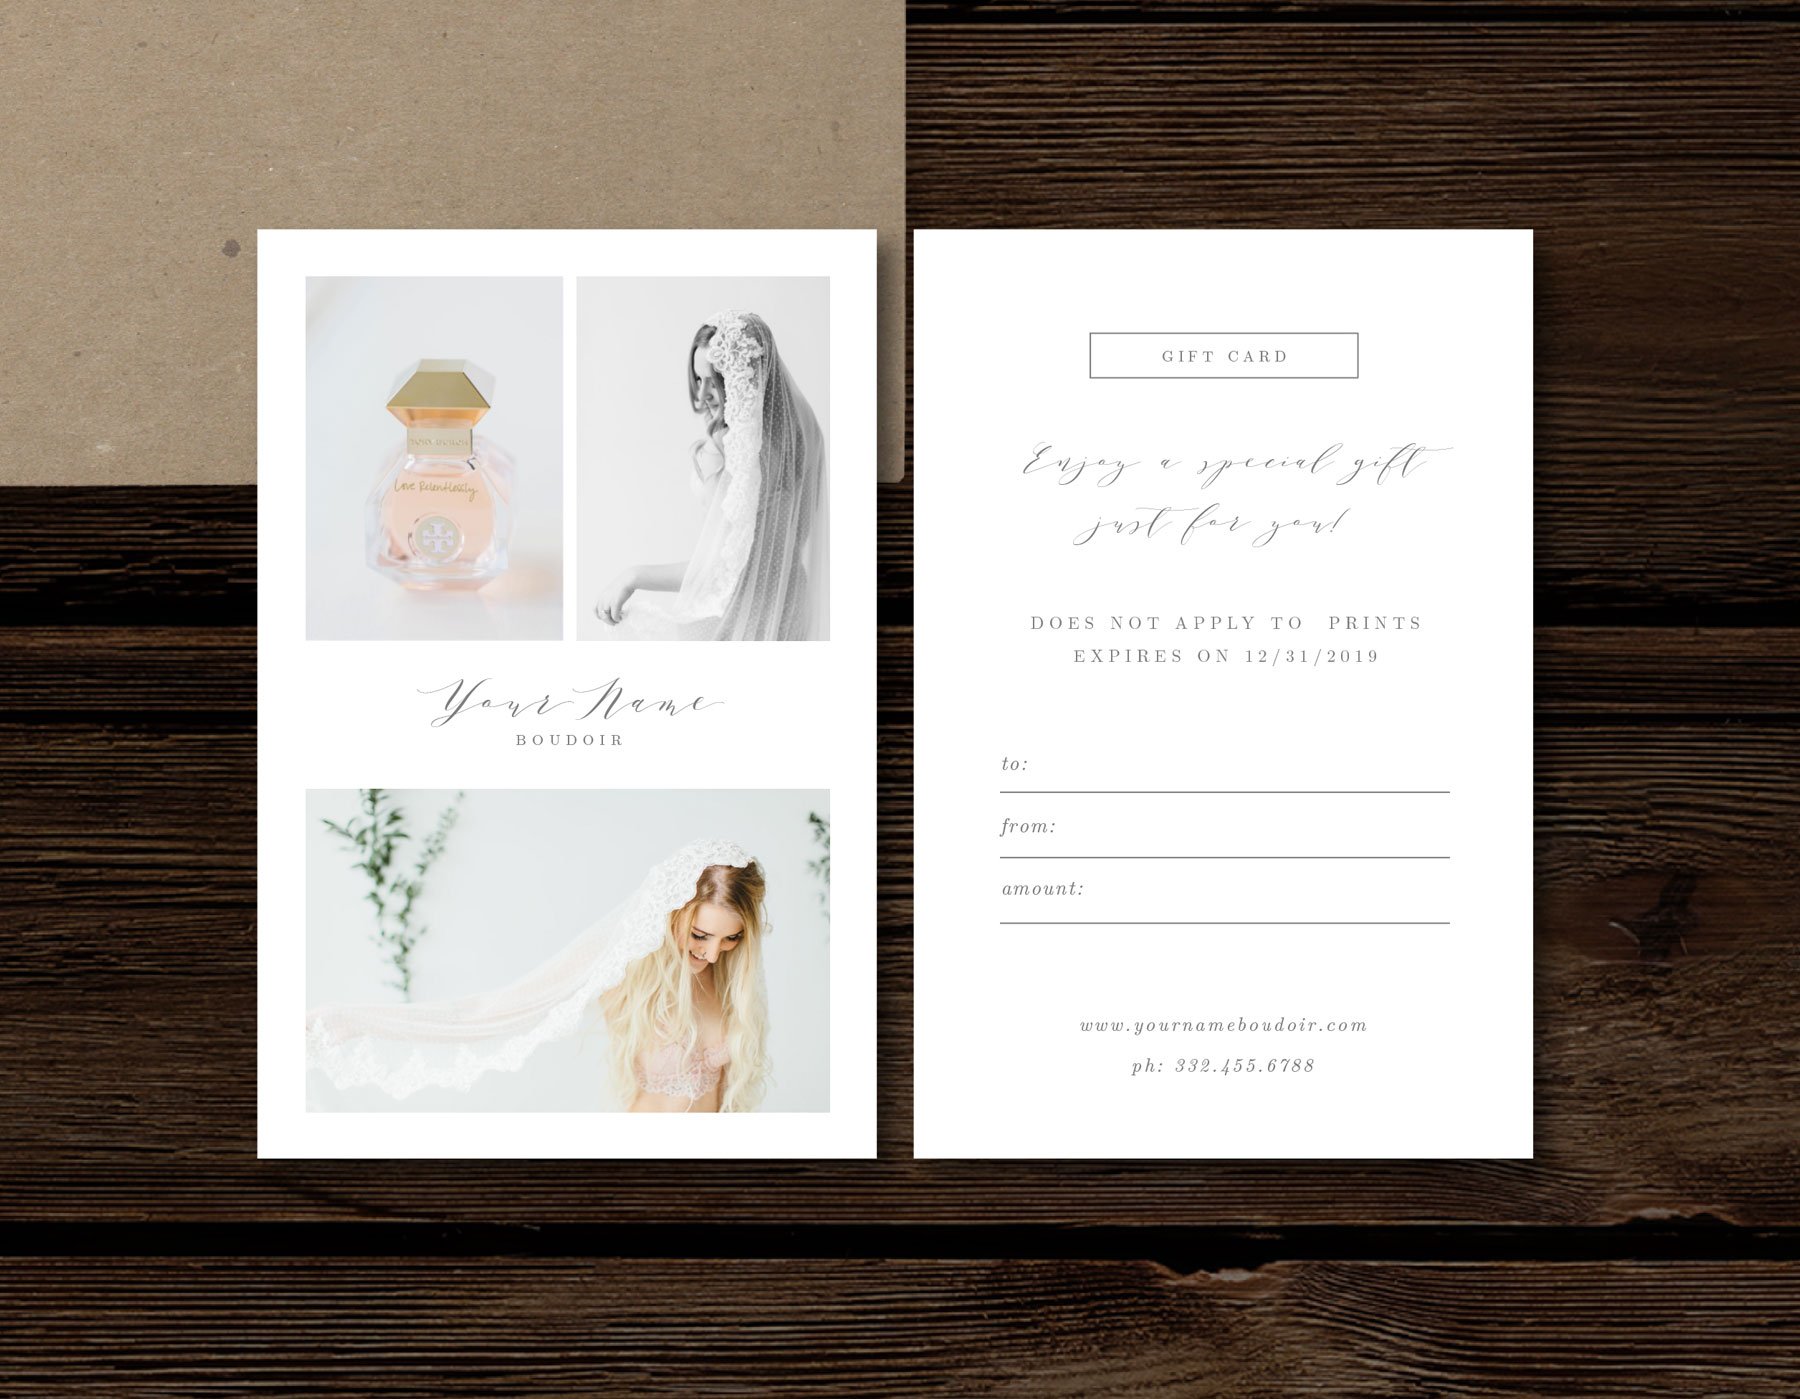 Boudoir Gift Certificate Template cover image.